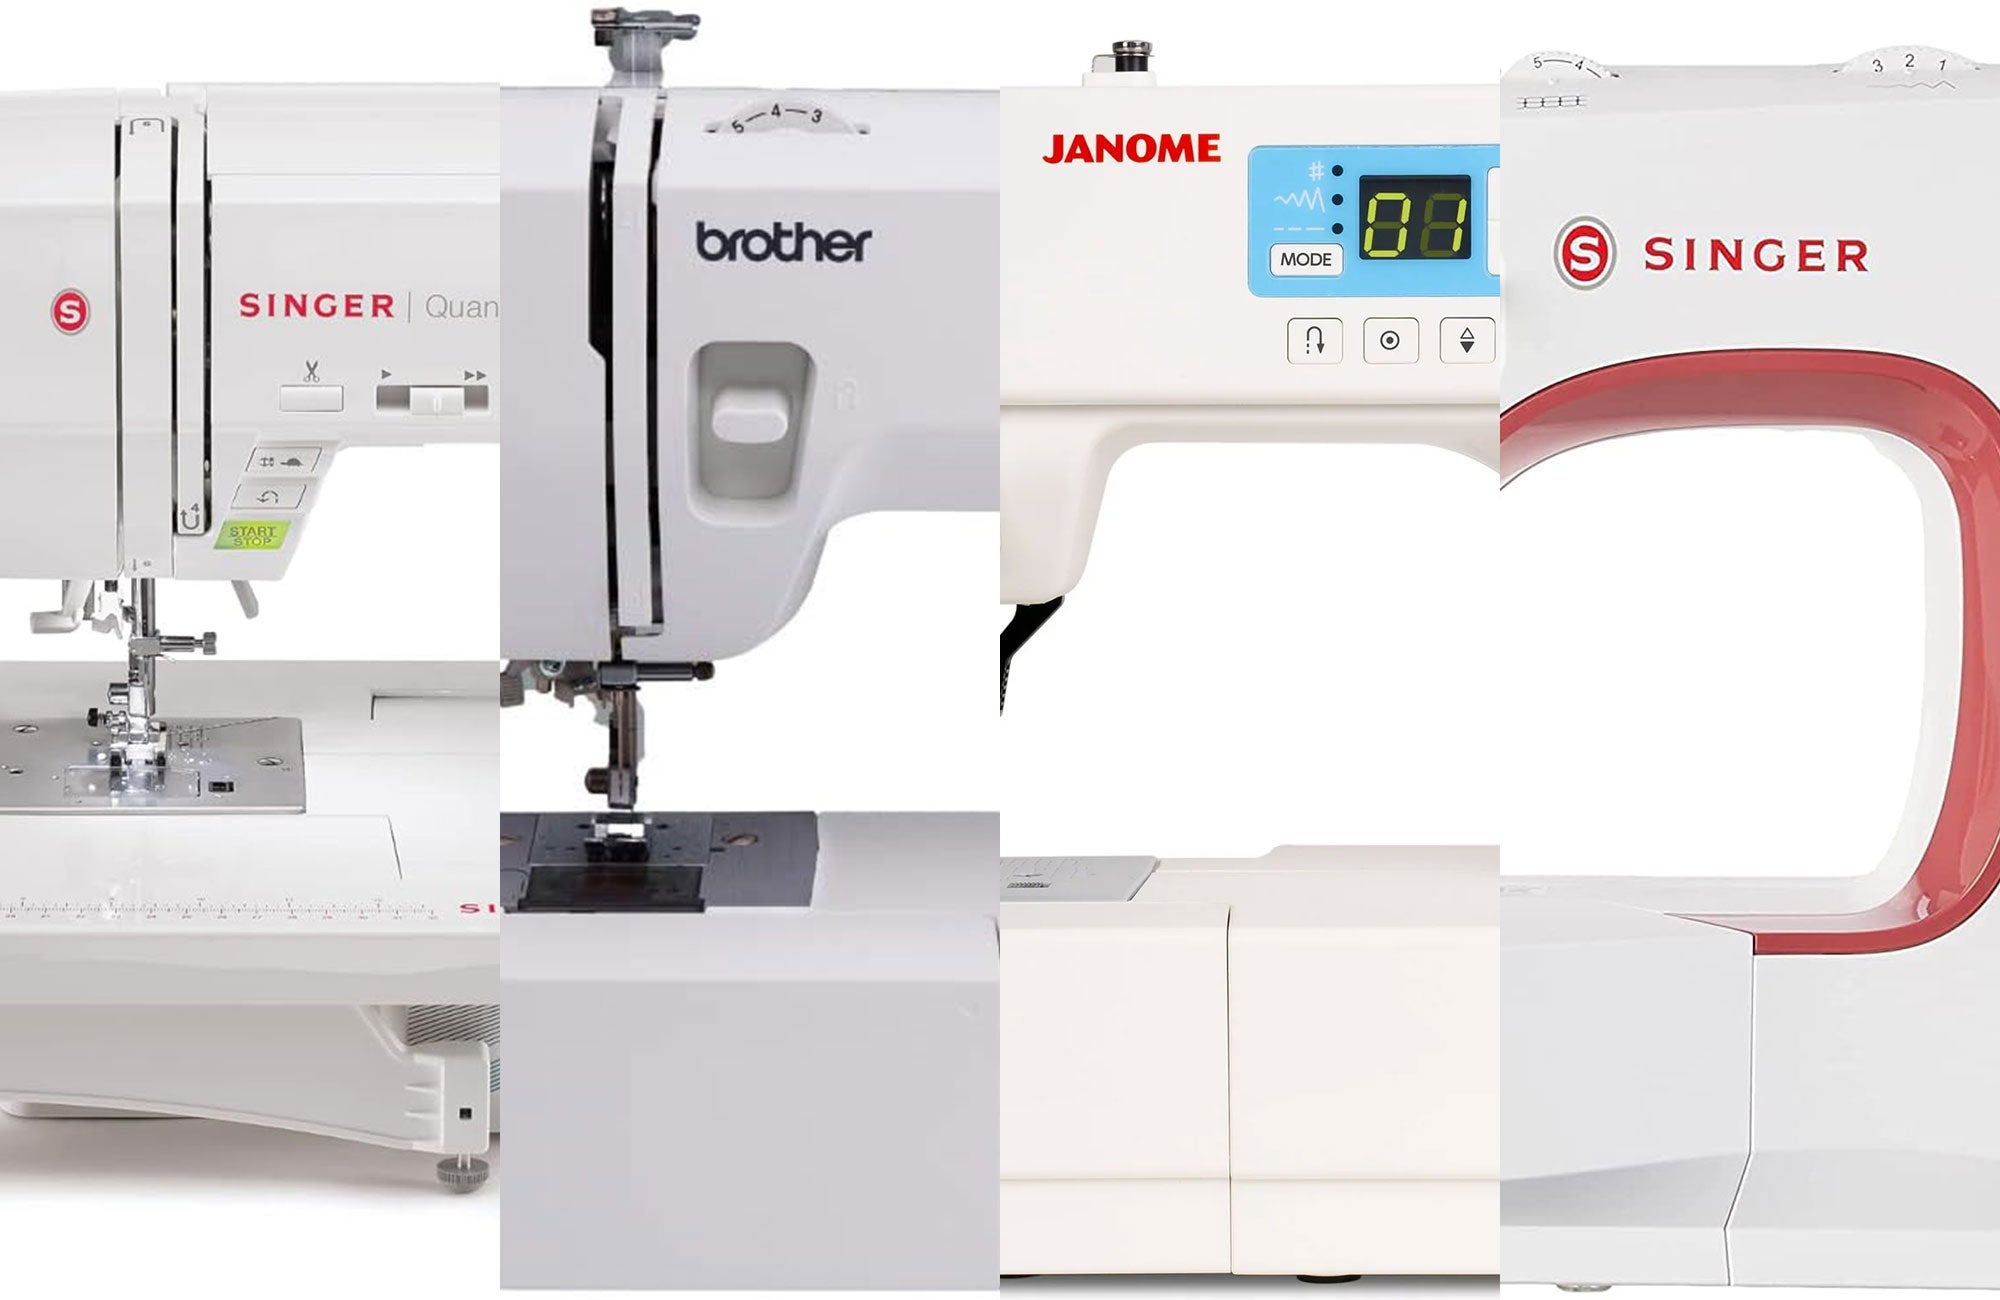 Sewing Machine Review: Singer Professional 9100 – the thread